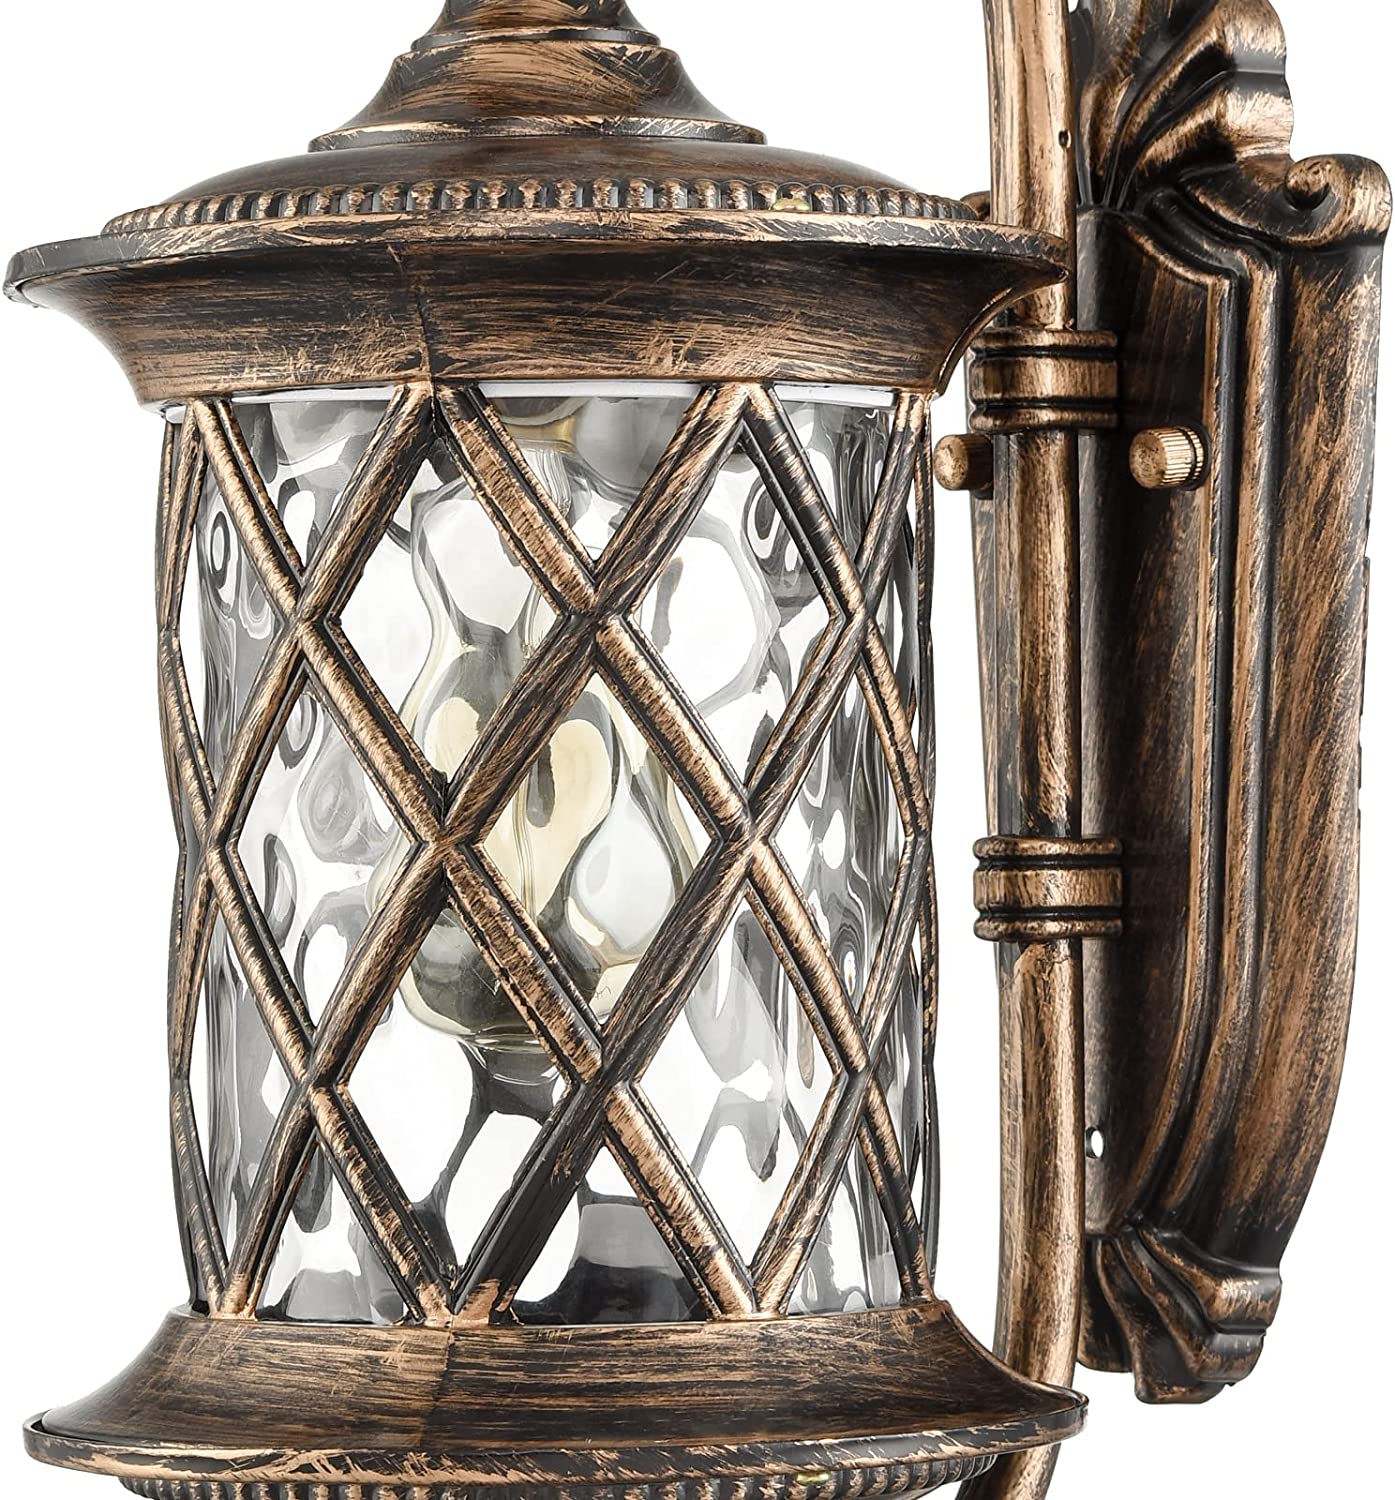 Retro wall lights vintage wall light with glass shade